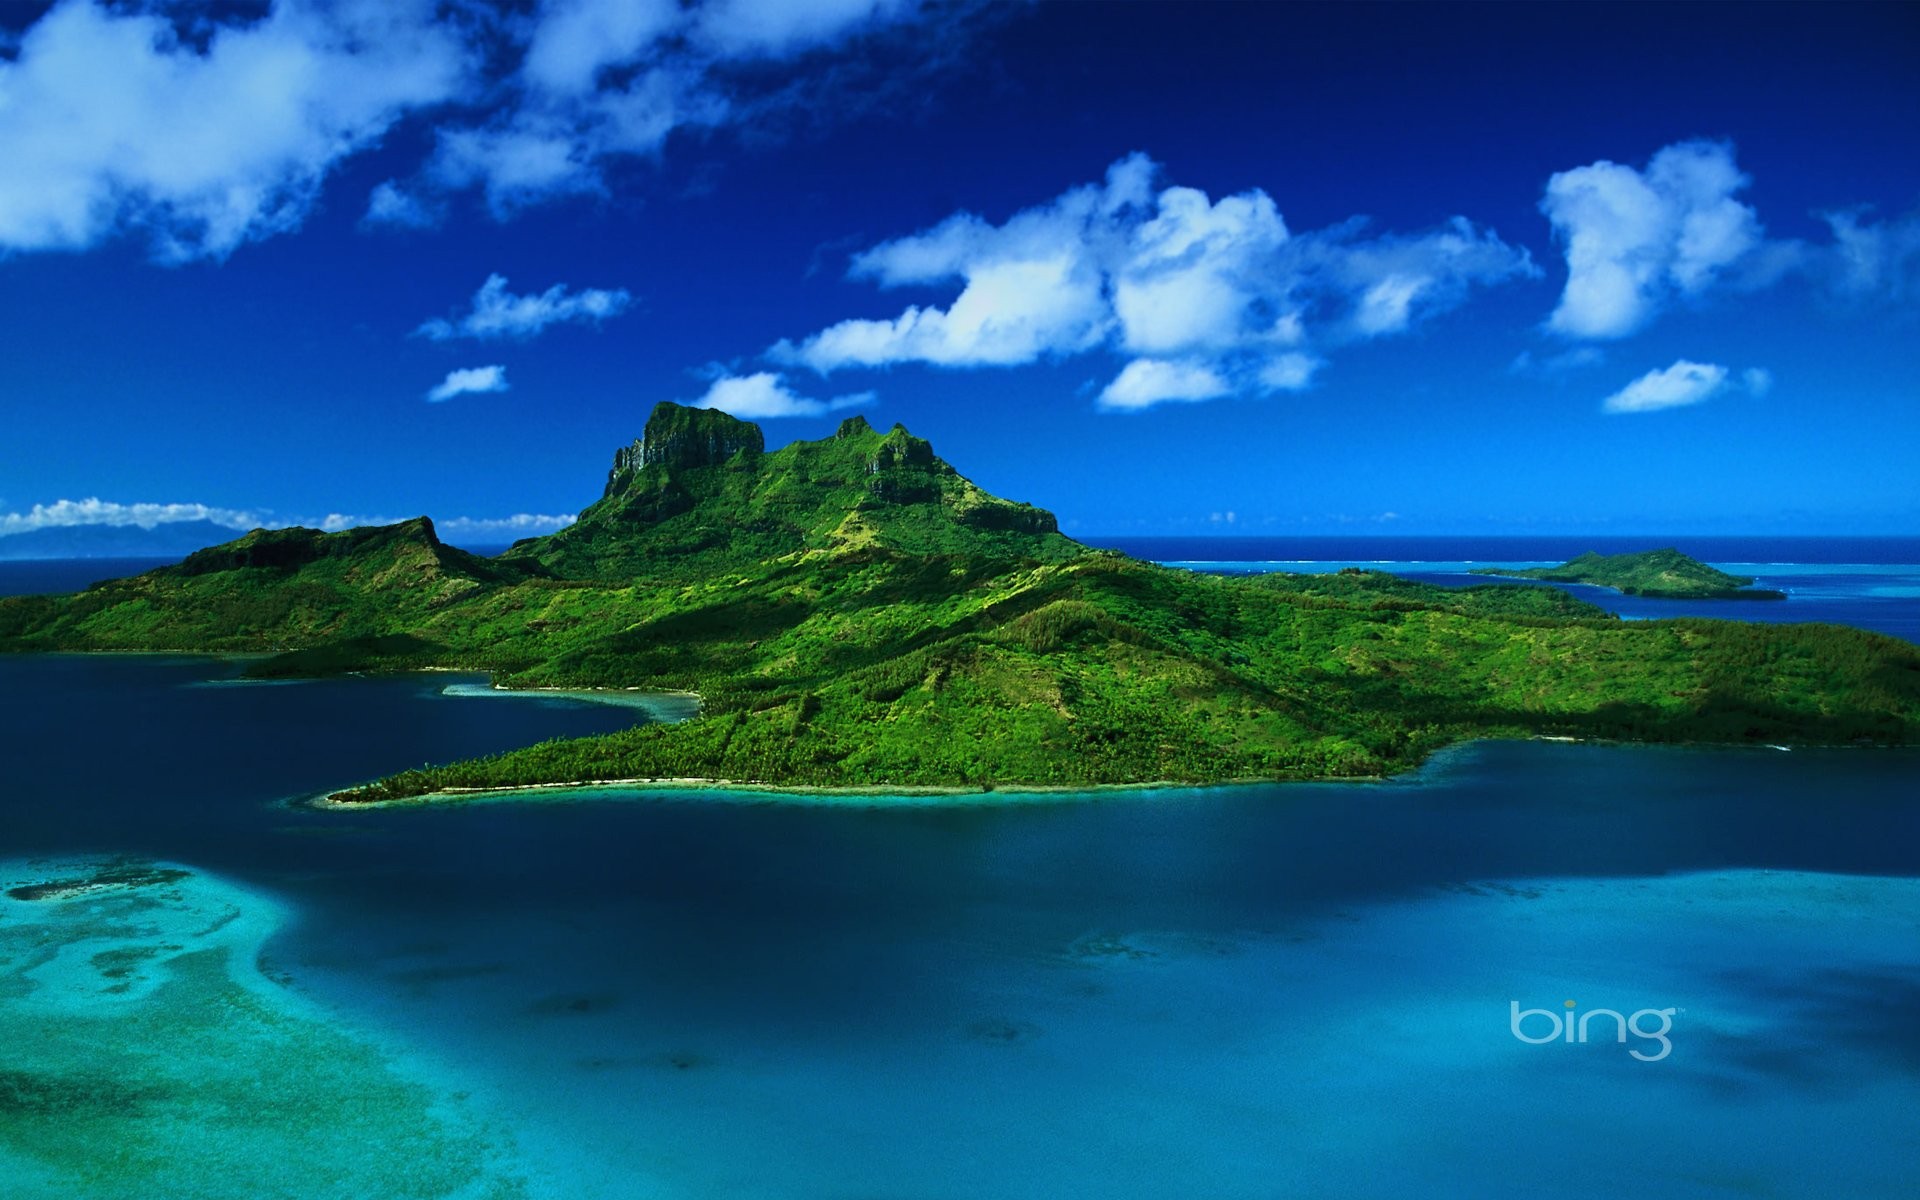 Green island in the blue sea wallpapers and images - wallpapers ...